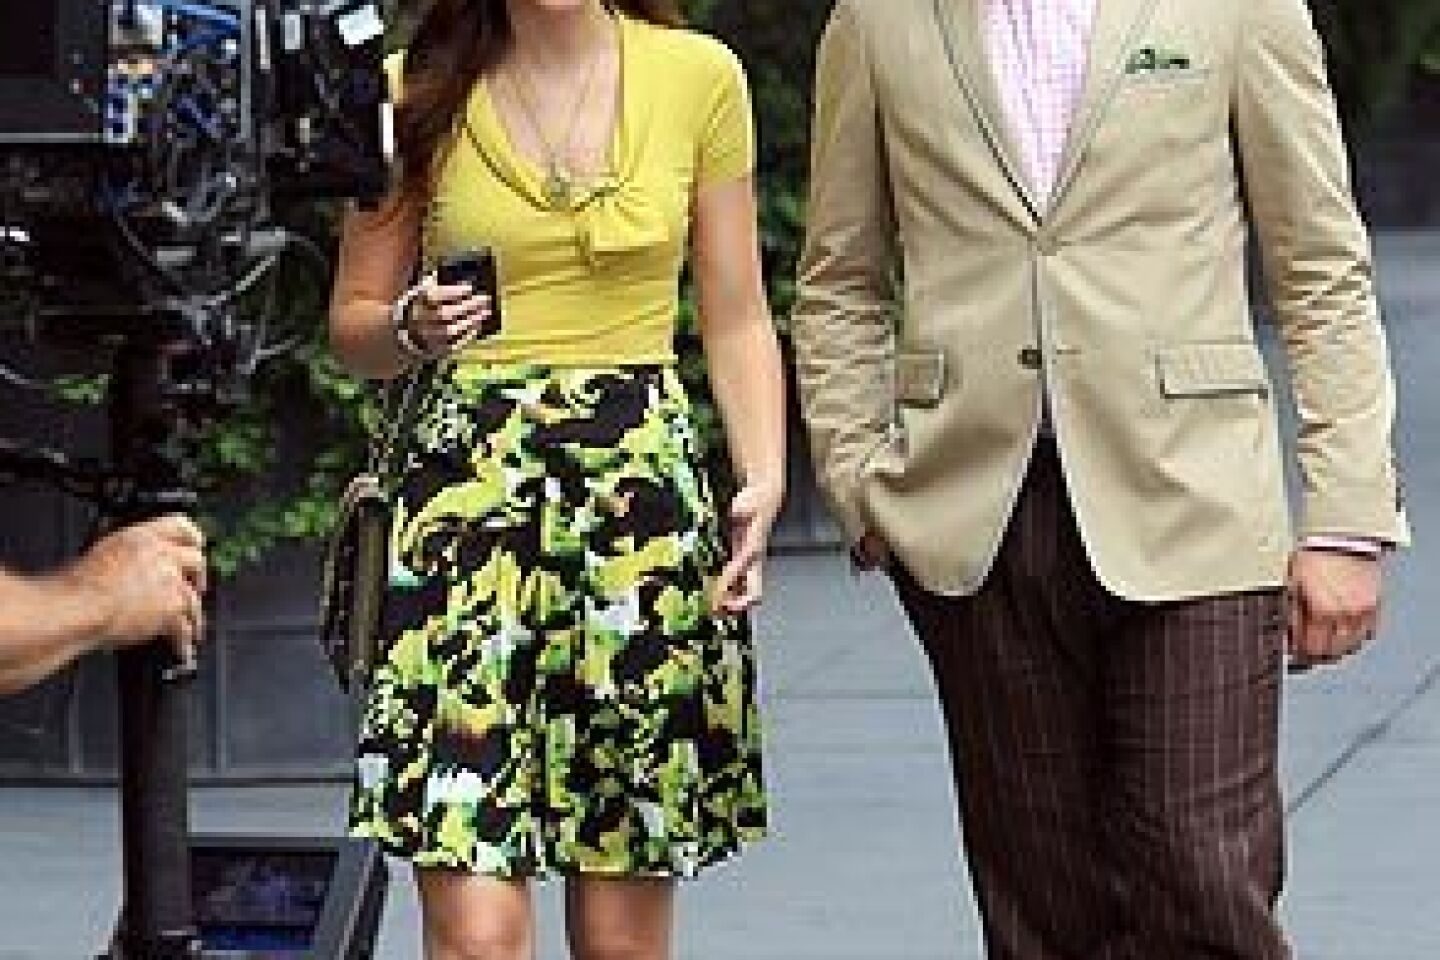 Leighton Meester and Ed Westwick